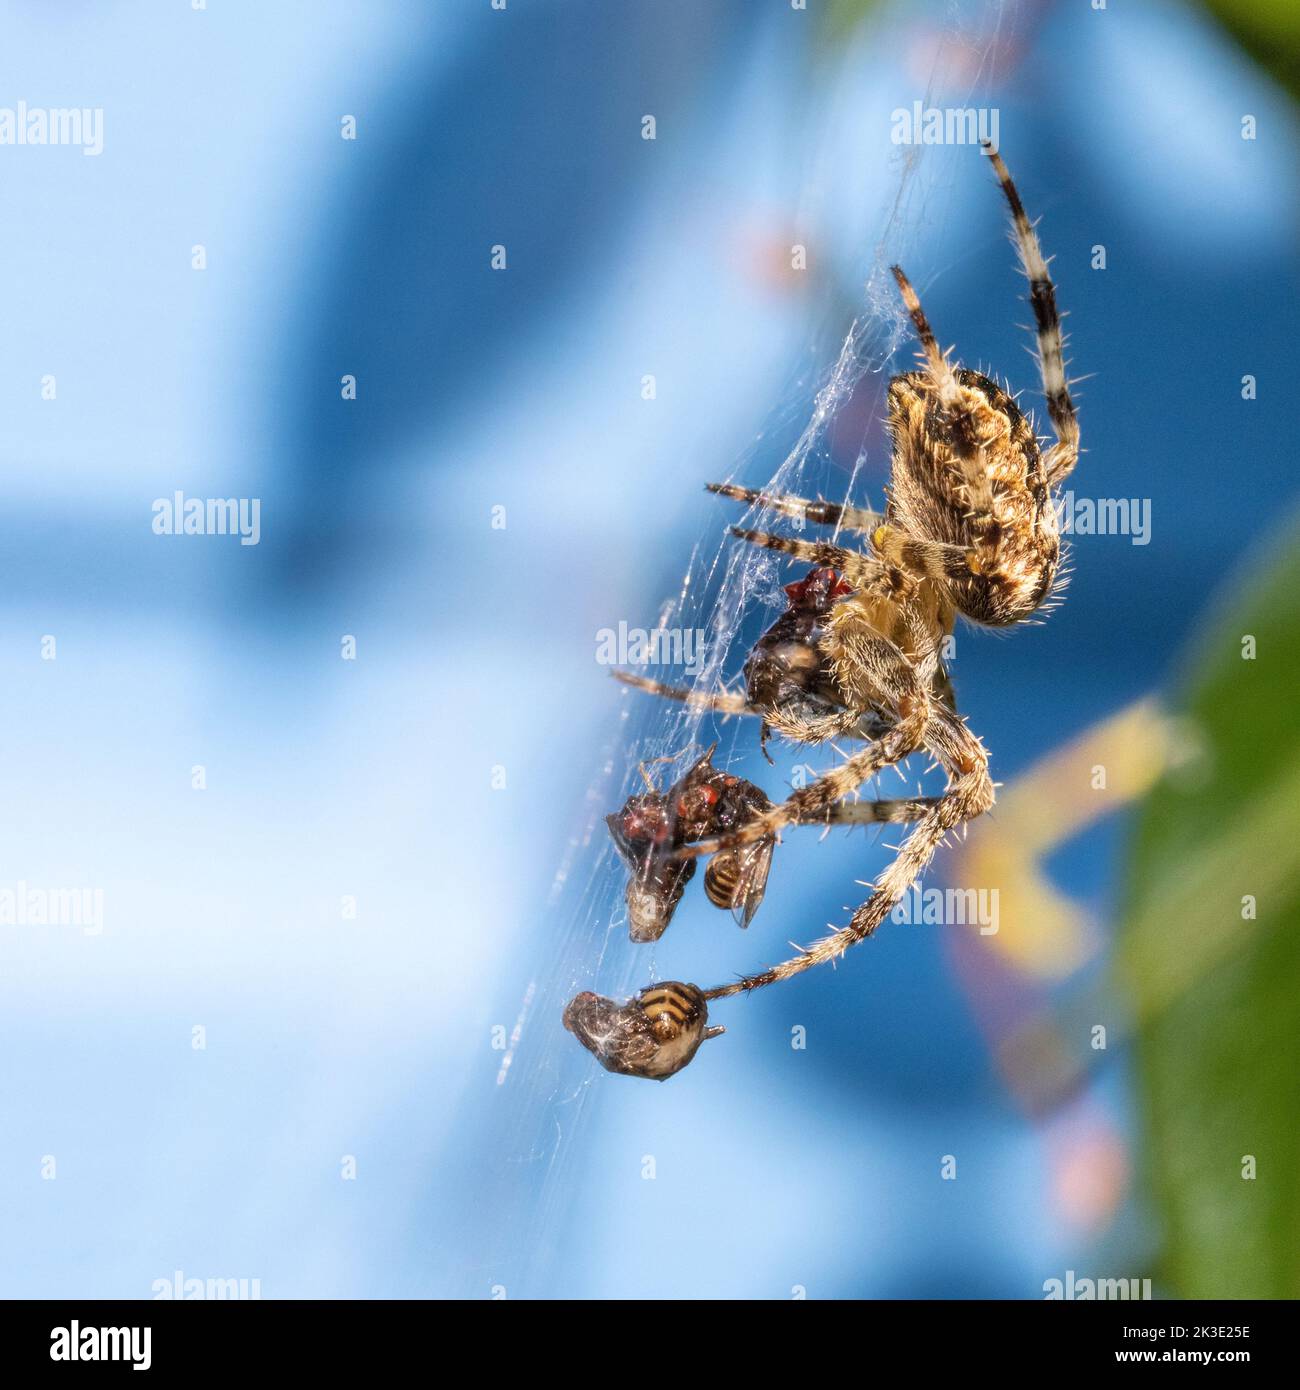 European garden spider (Araneus diadematus) with a large collection of flies caught in its web against a blue shed backdrop, UK Stock Photo